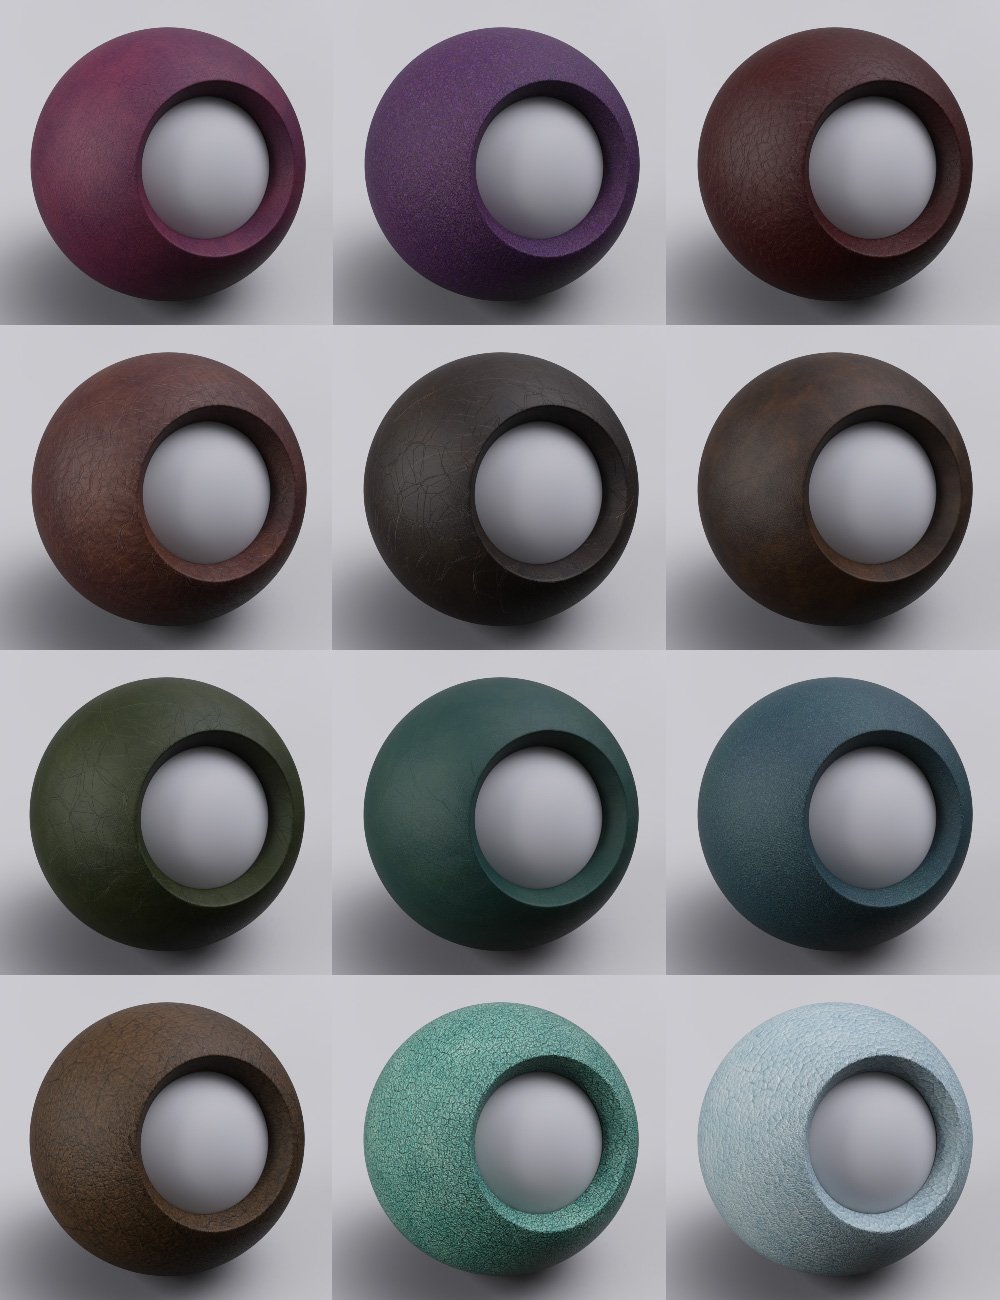 Leather and Gems Iray Shaders by: JGreenlees, 3D Models by Daz 3D